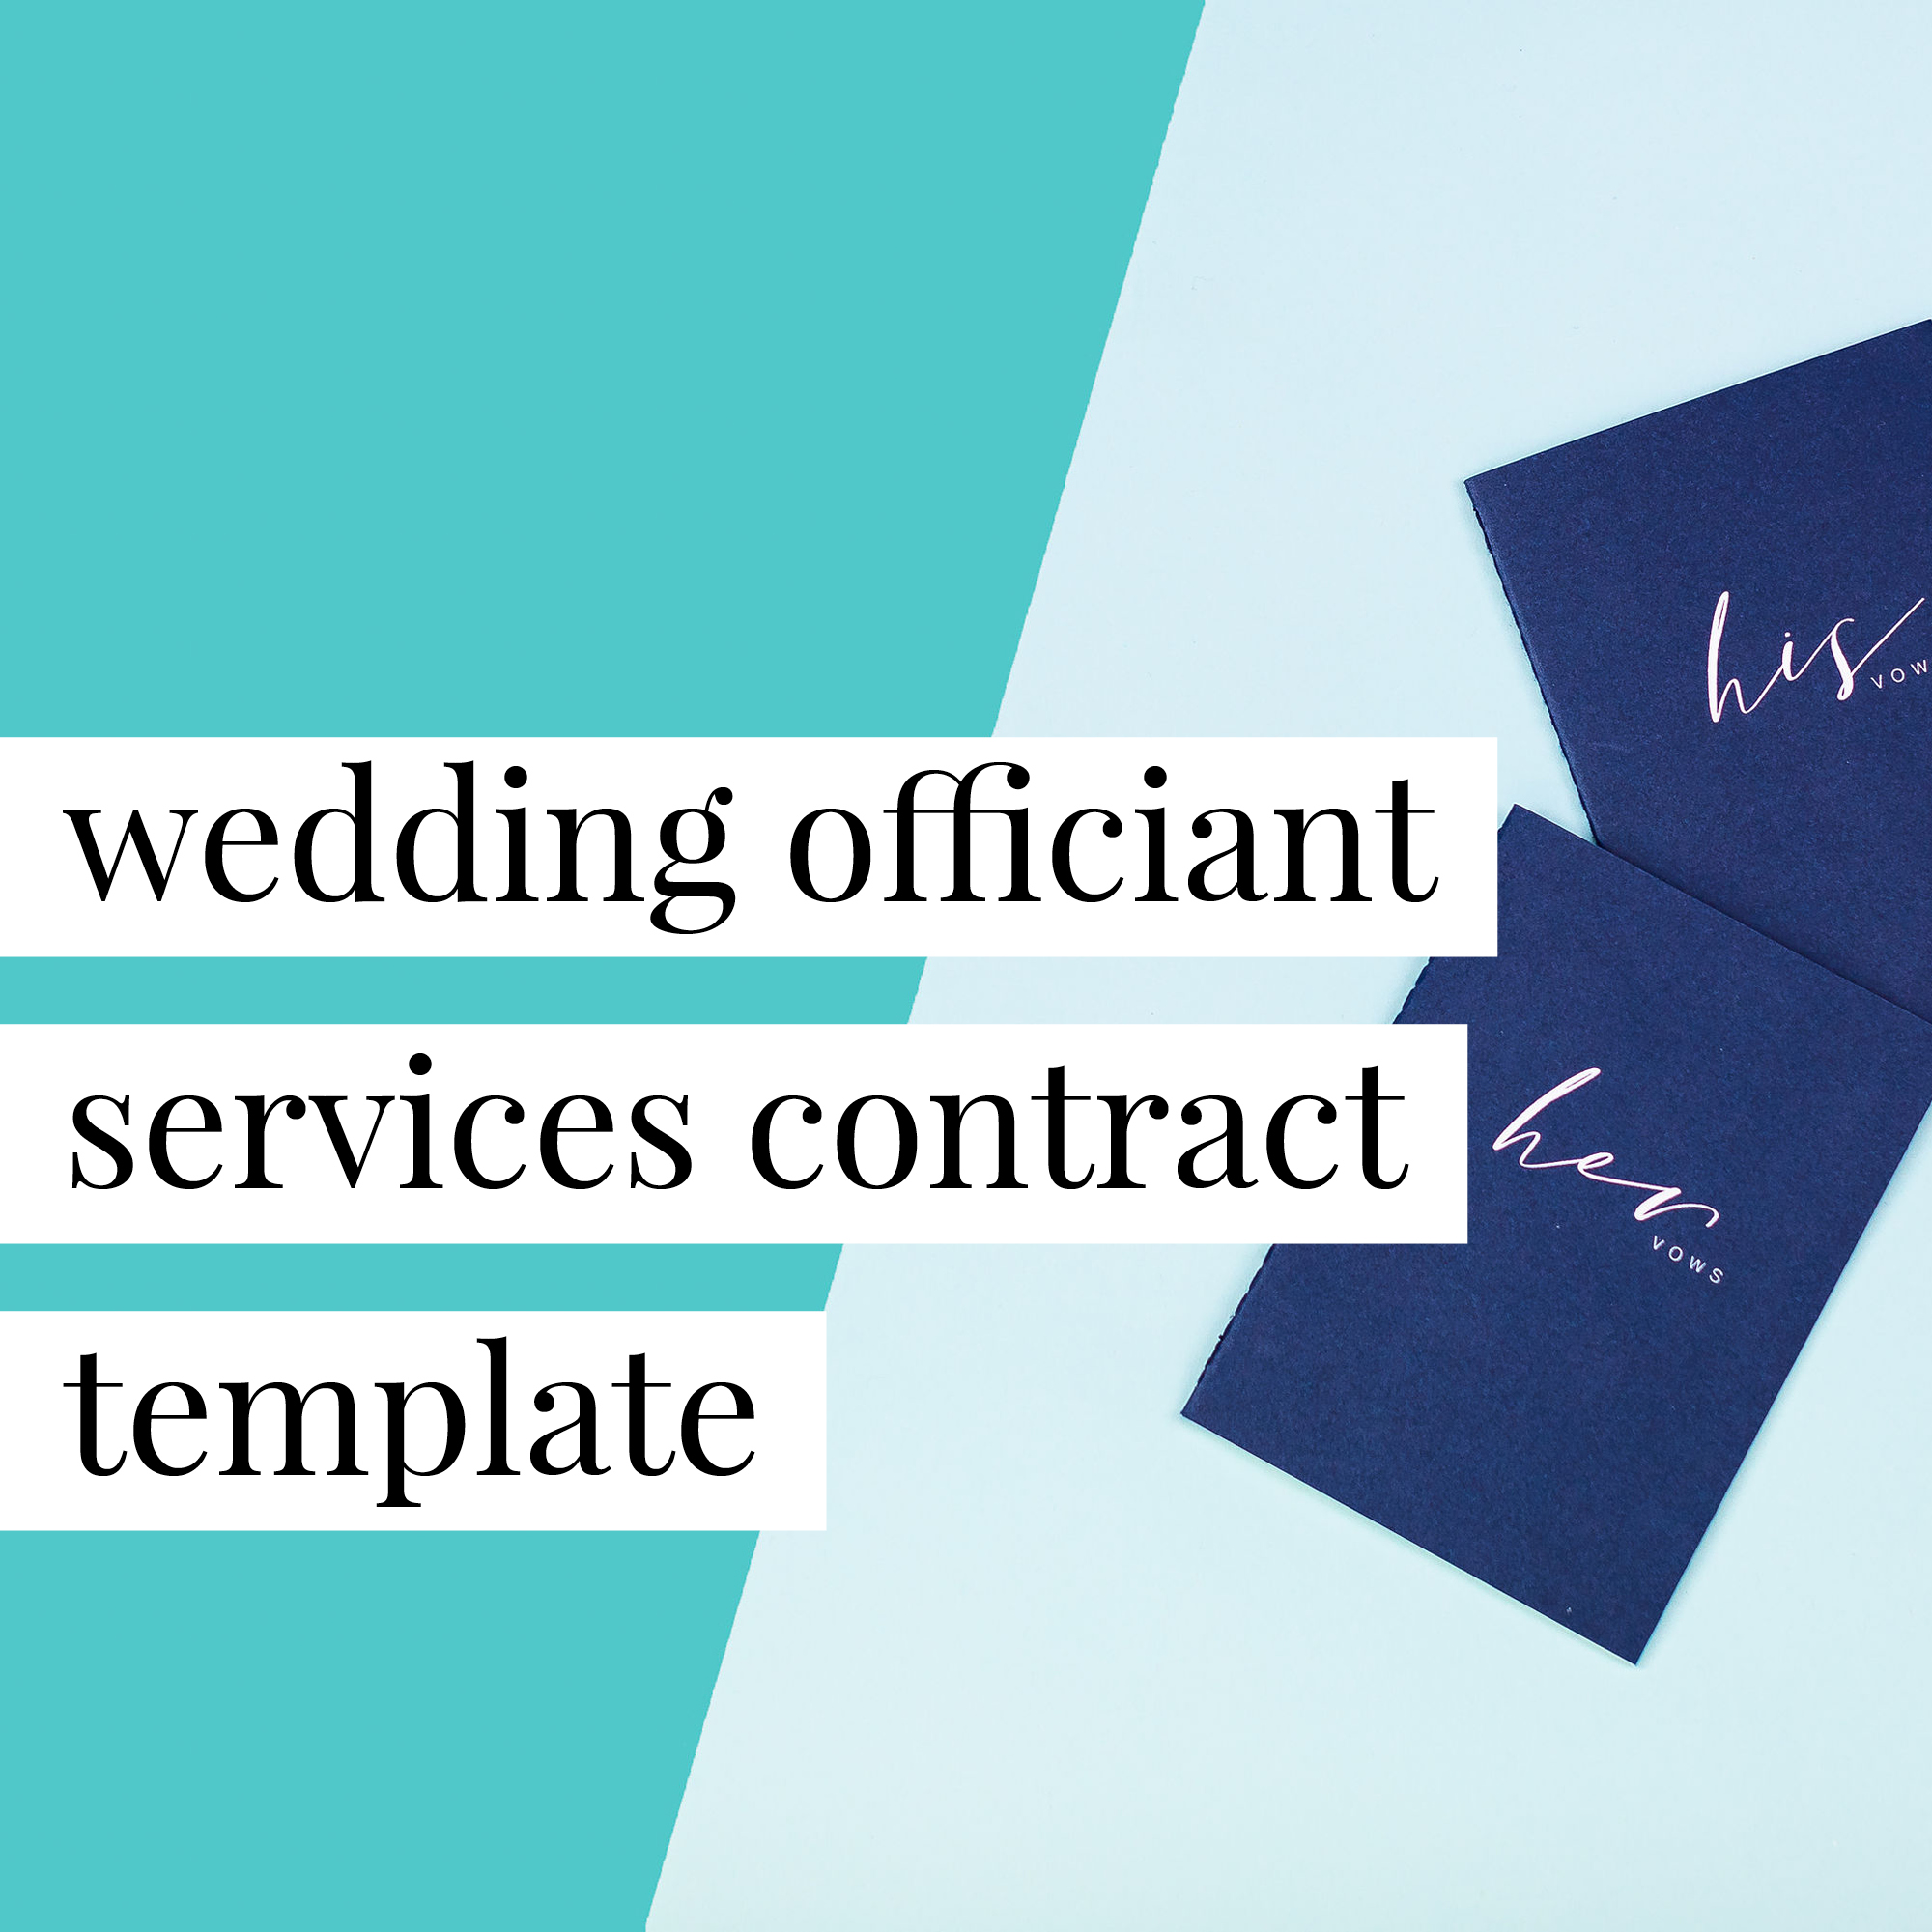 wedding-officiant-services-contract-template-your-legal-bff